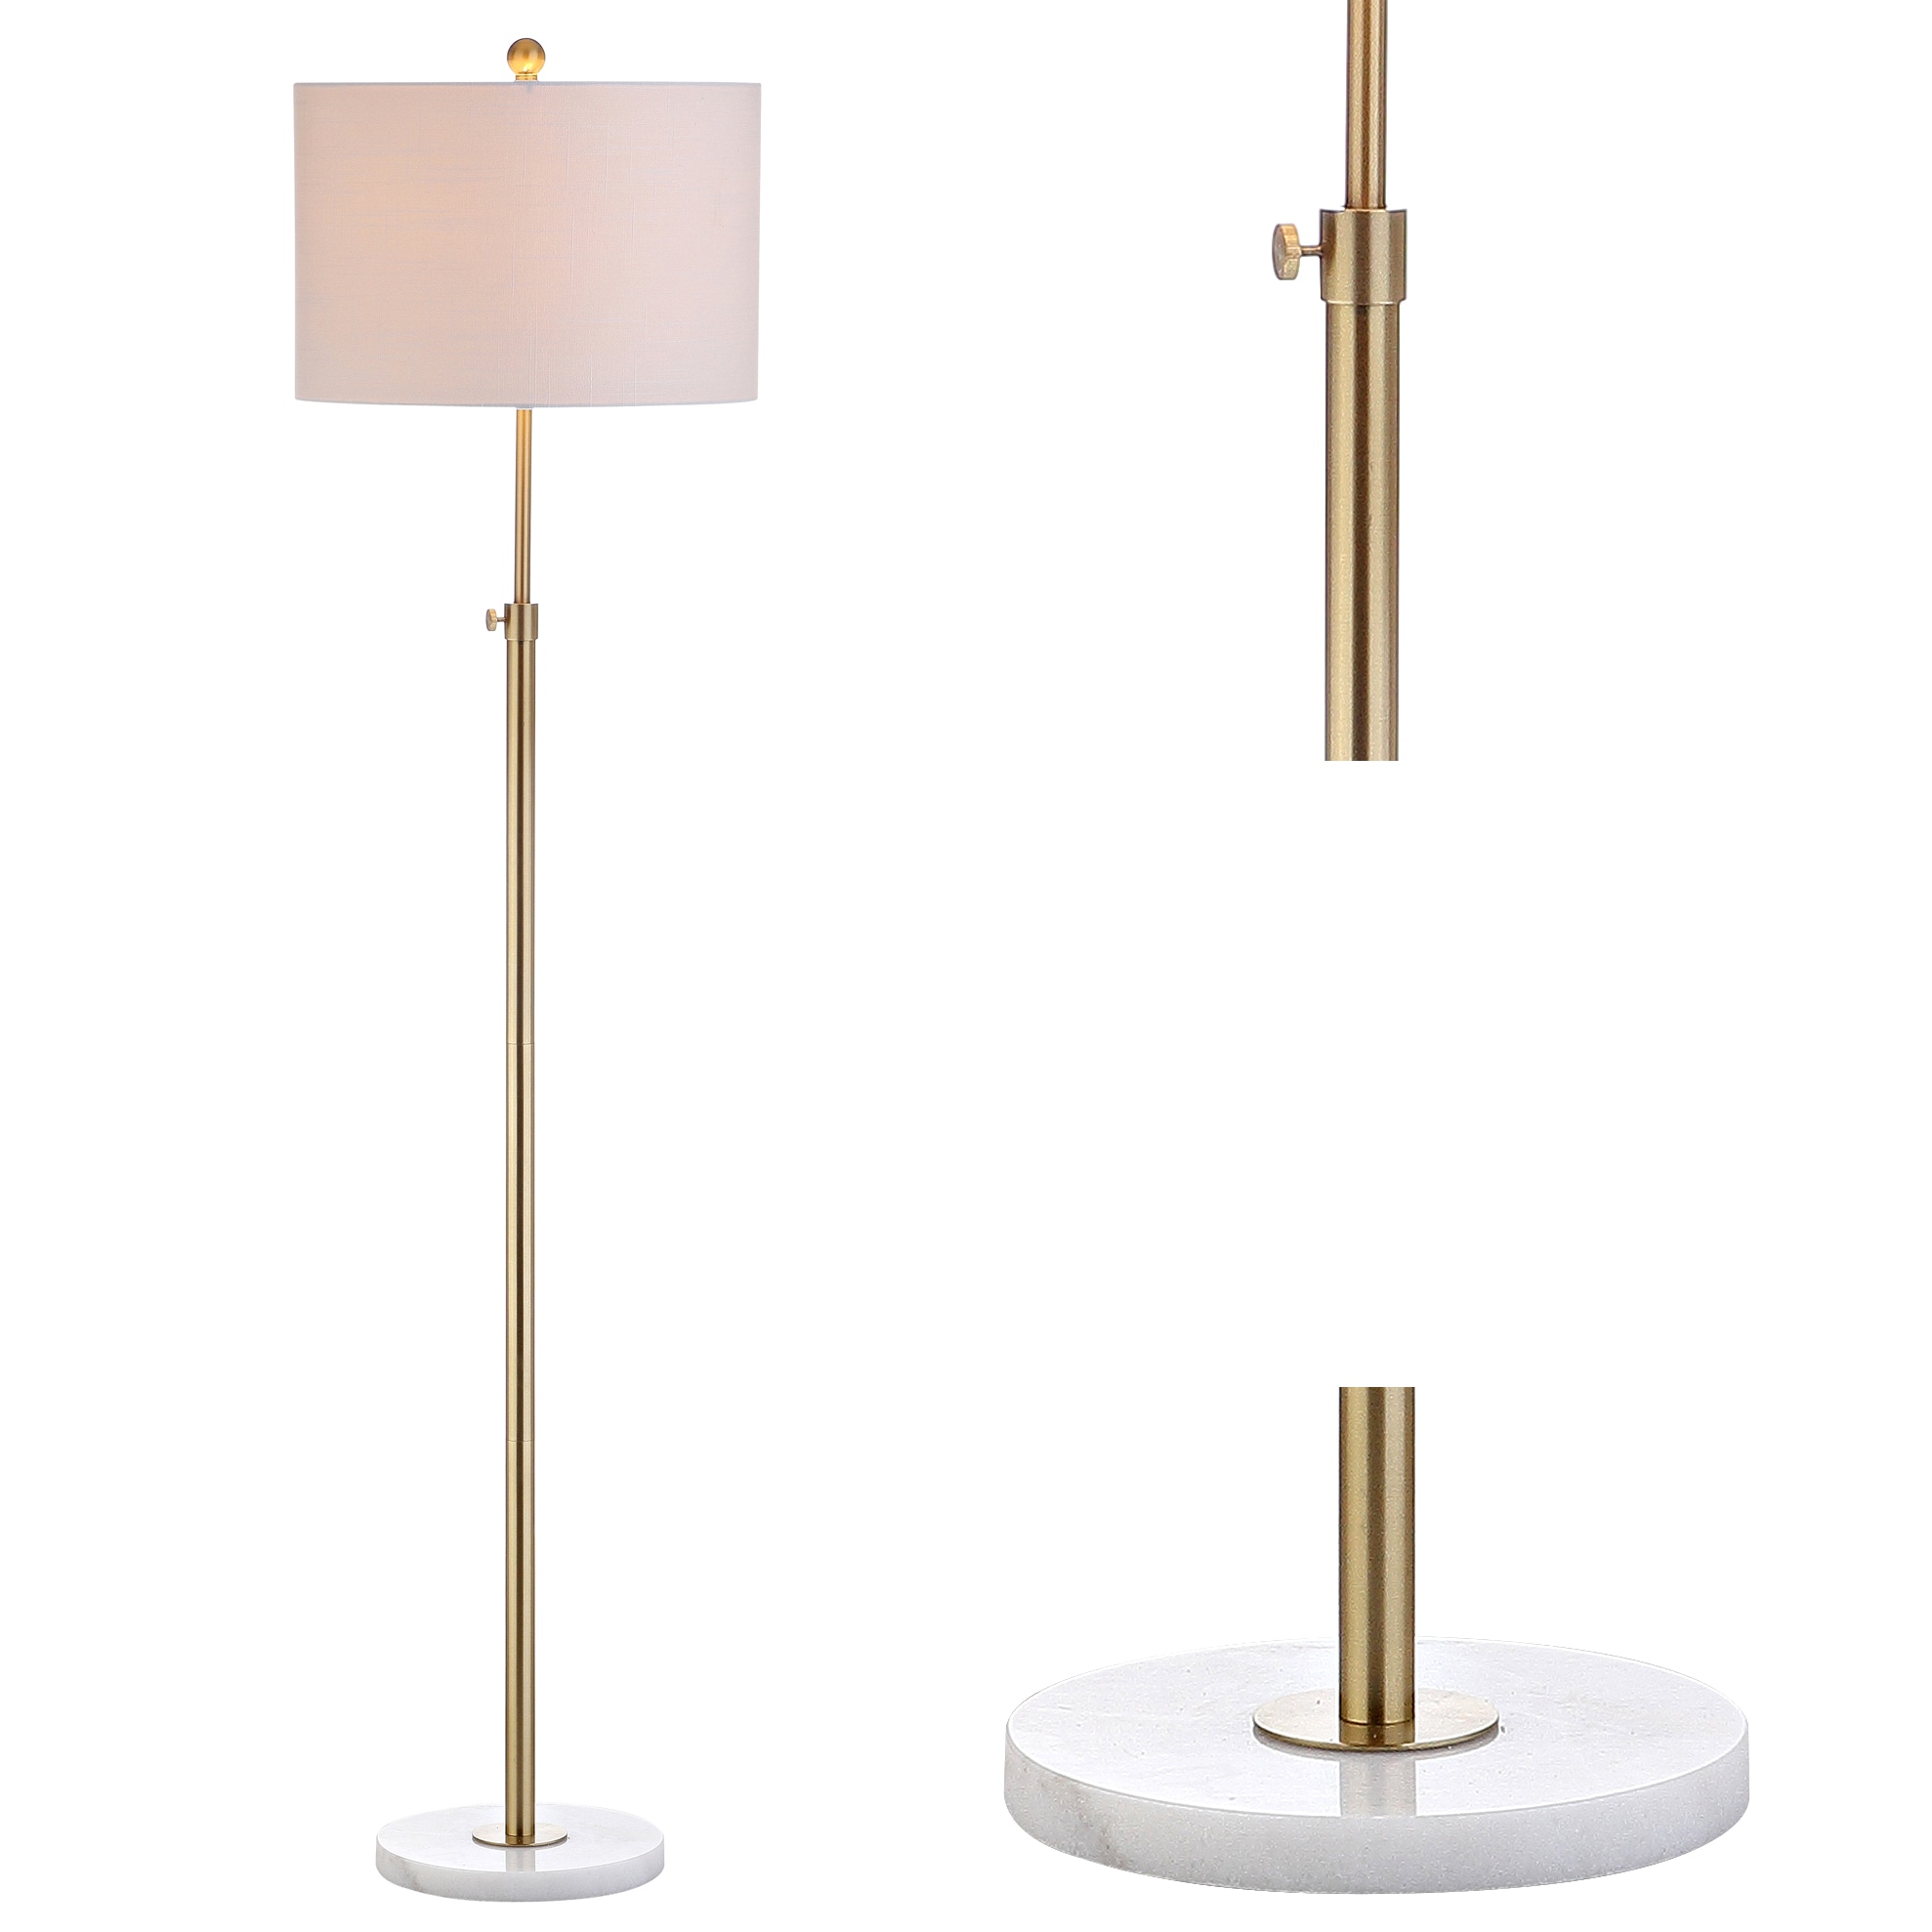 Modern Standard Floor Lamp in a Gold Metal Finish with a Grey Cylinder Light Shade 